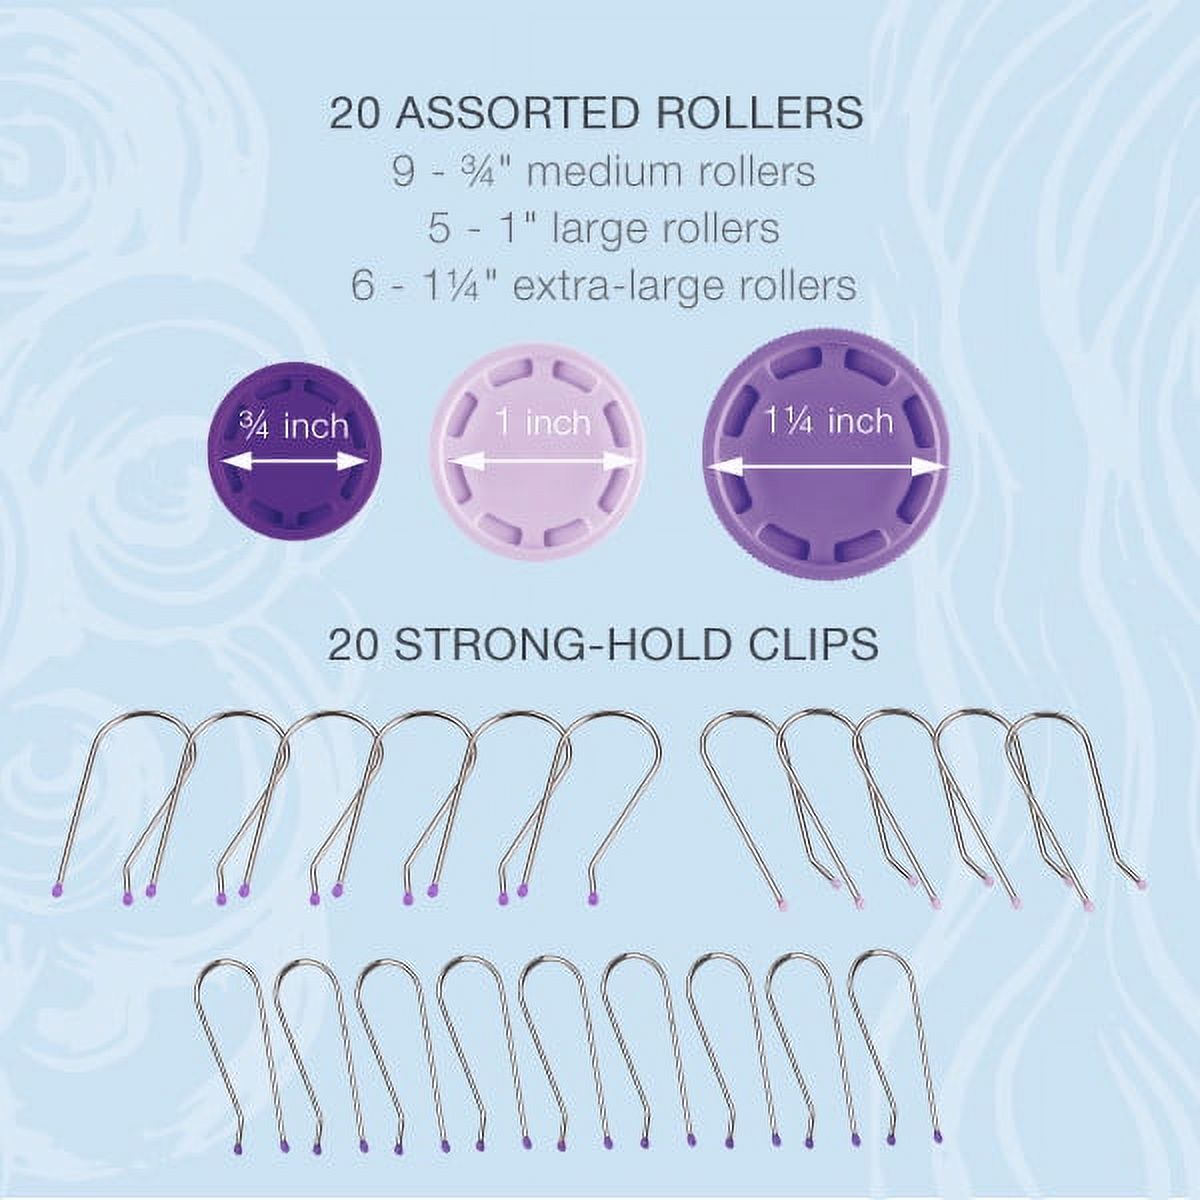 Conair EasyStart Hot Rollers, Create Curls and Waves That Last with 20 Assorted Hot Rollers and 20 Metal Pins, HS11RX - image 4 of 7